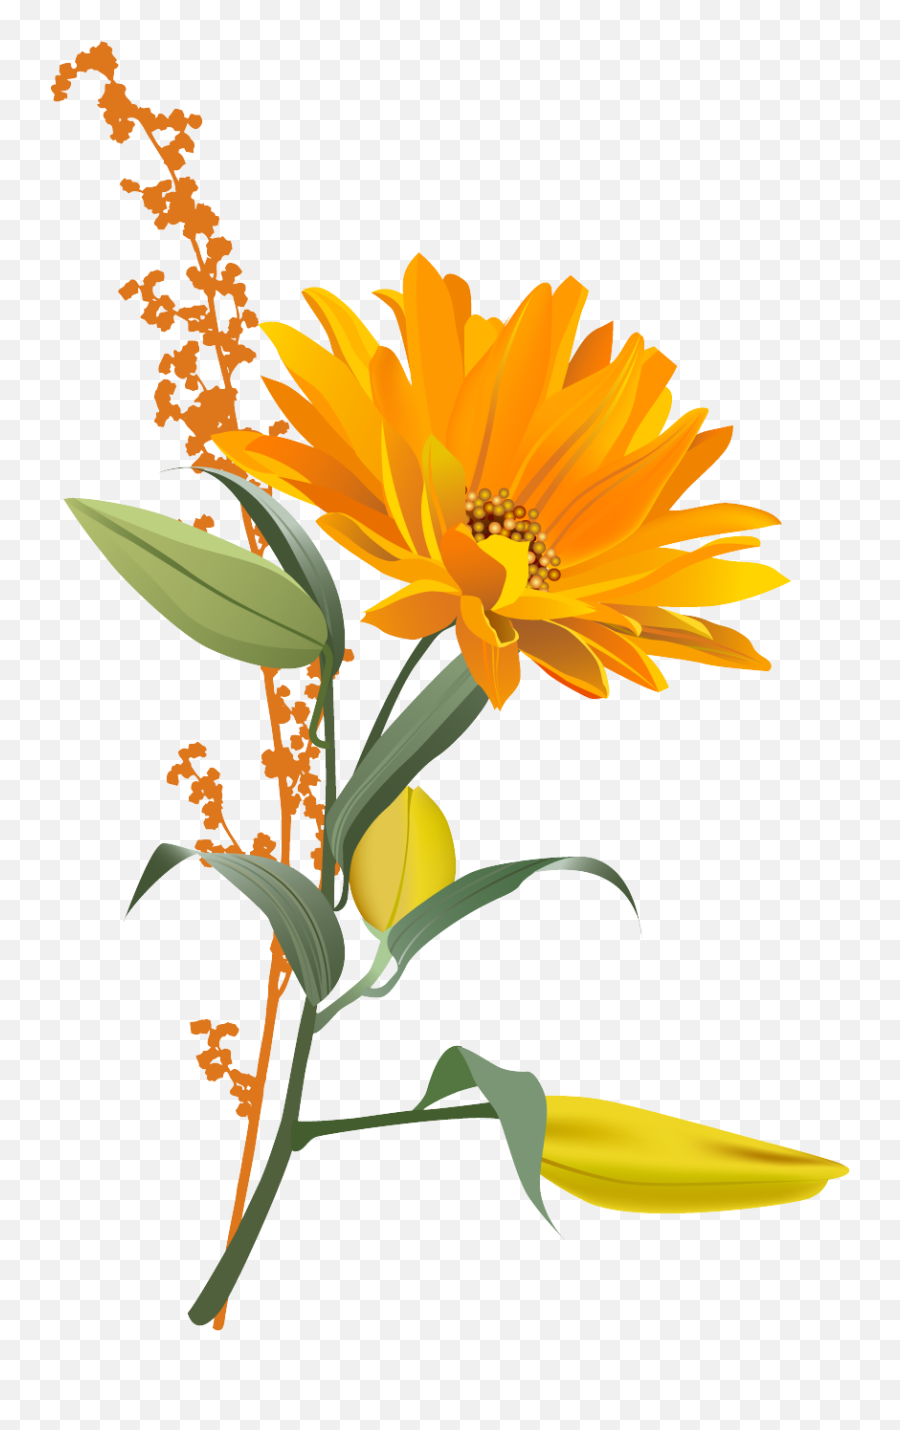 Free Download Of Sunflower Icon Clipart - Transparent Background Orange Flower Png,Sunflower Icon